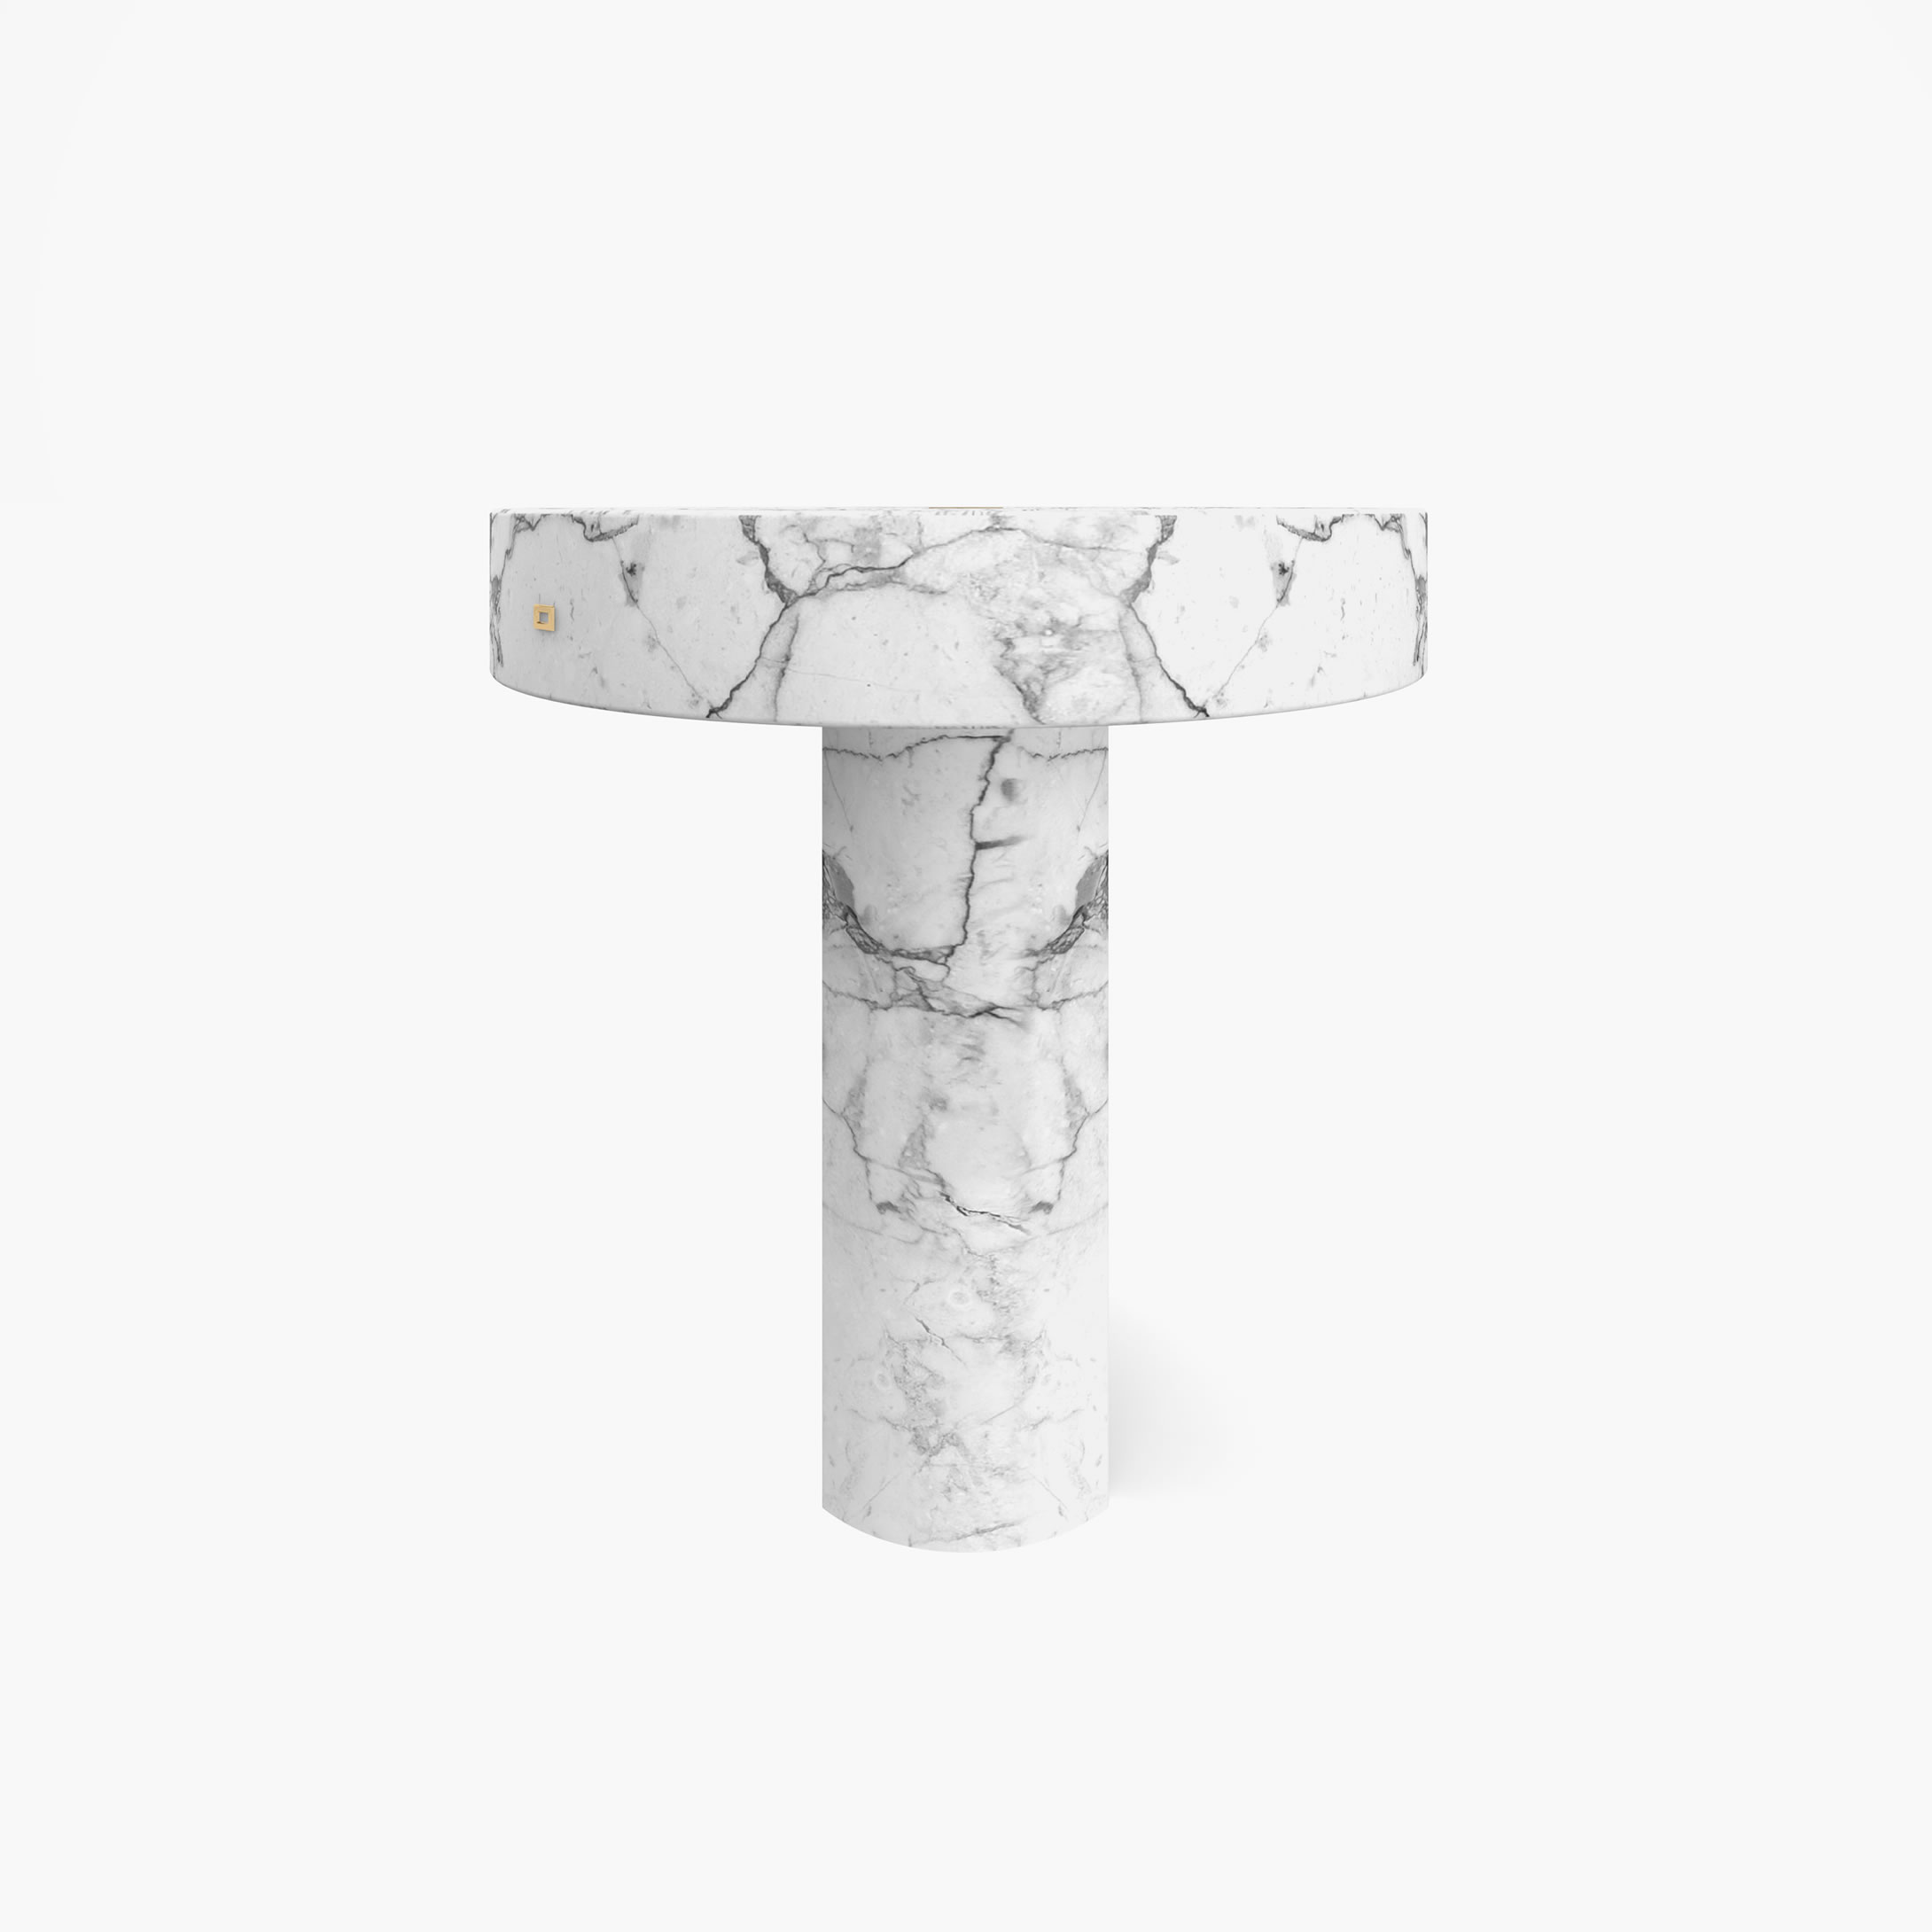 Side Table round high Cylinder cuboid prism White Arabescato Marble collectible Living Room designs Side Tables FS 128 b FELIX SCHWAKE